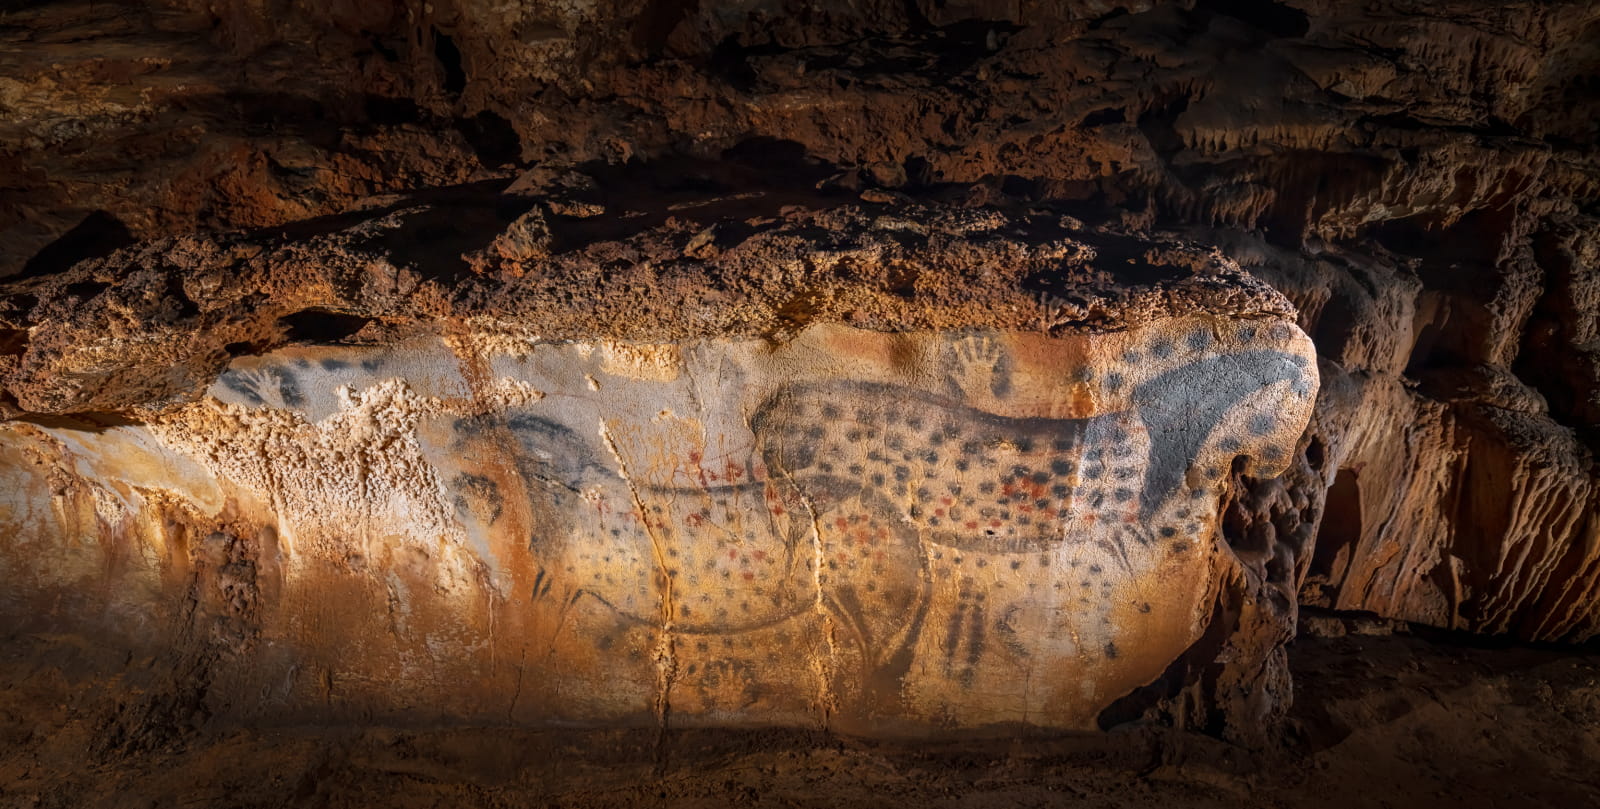 Spotted horses - very wide view - Grotte du Pech Merle